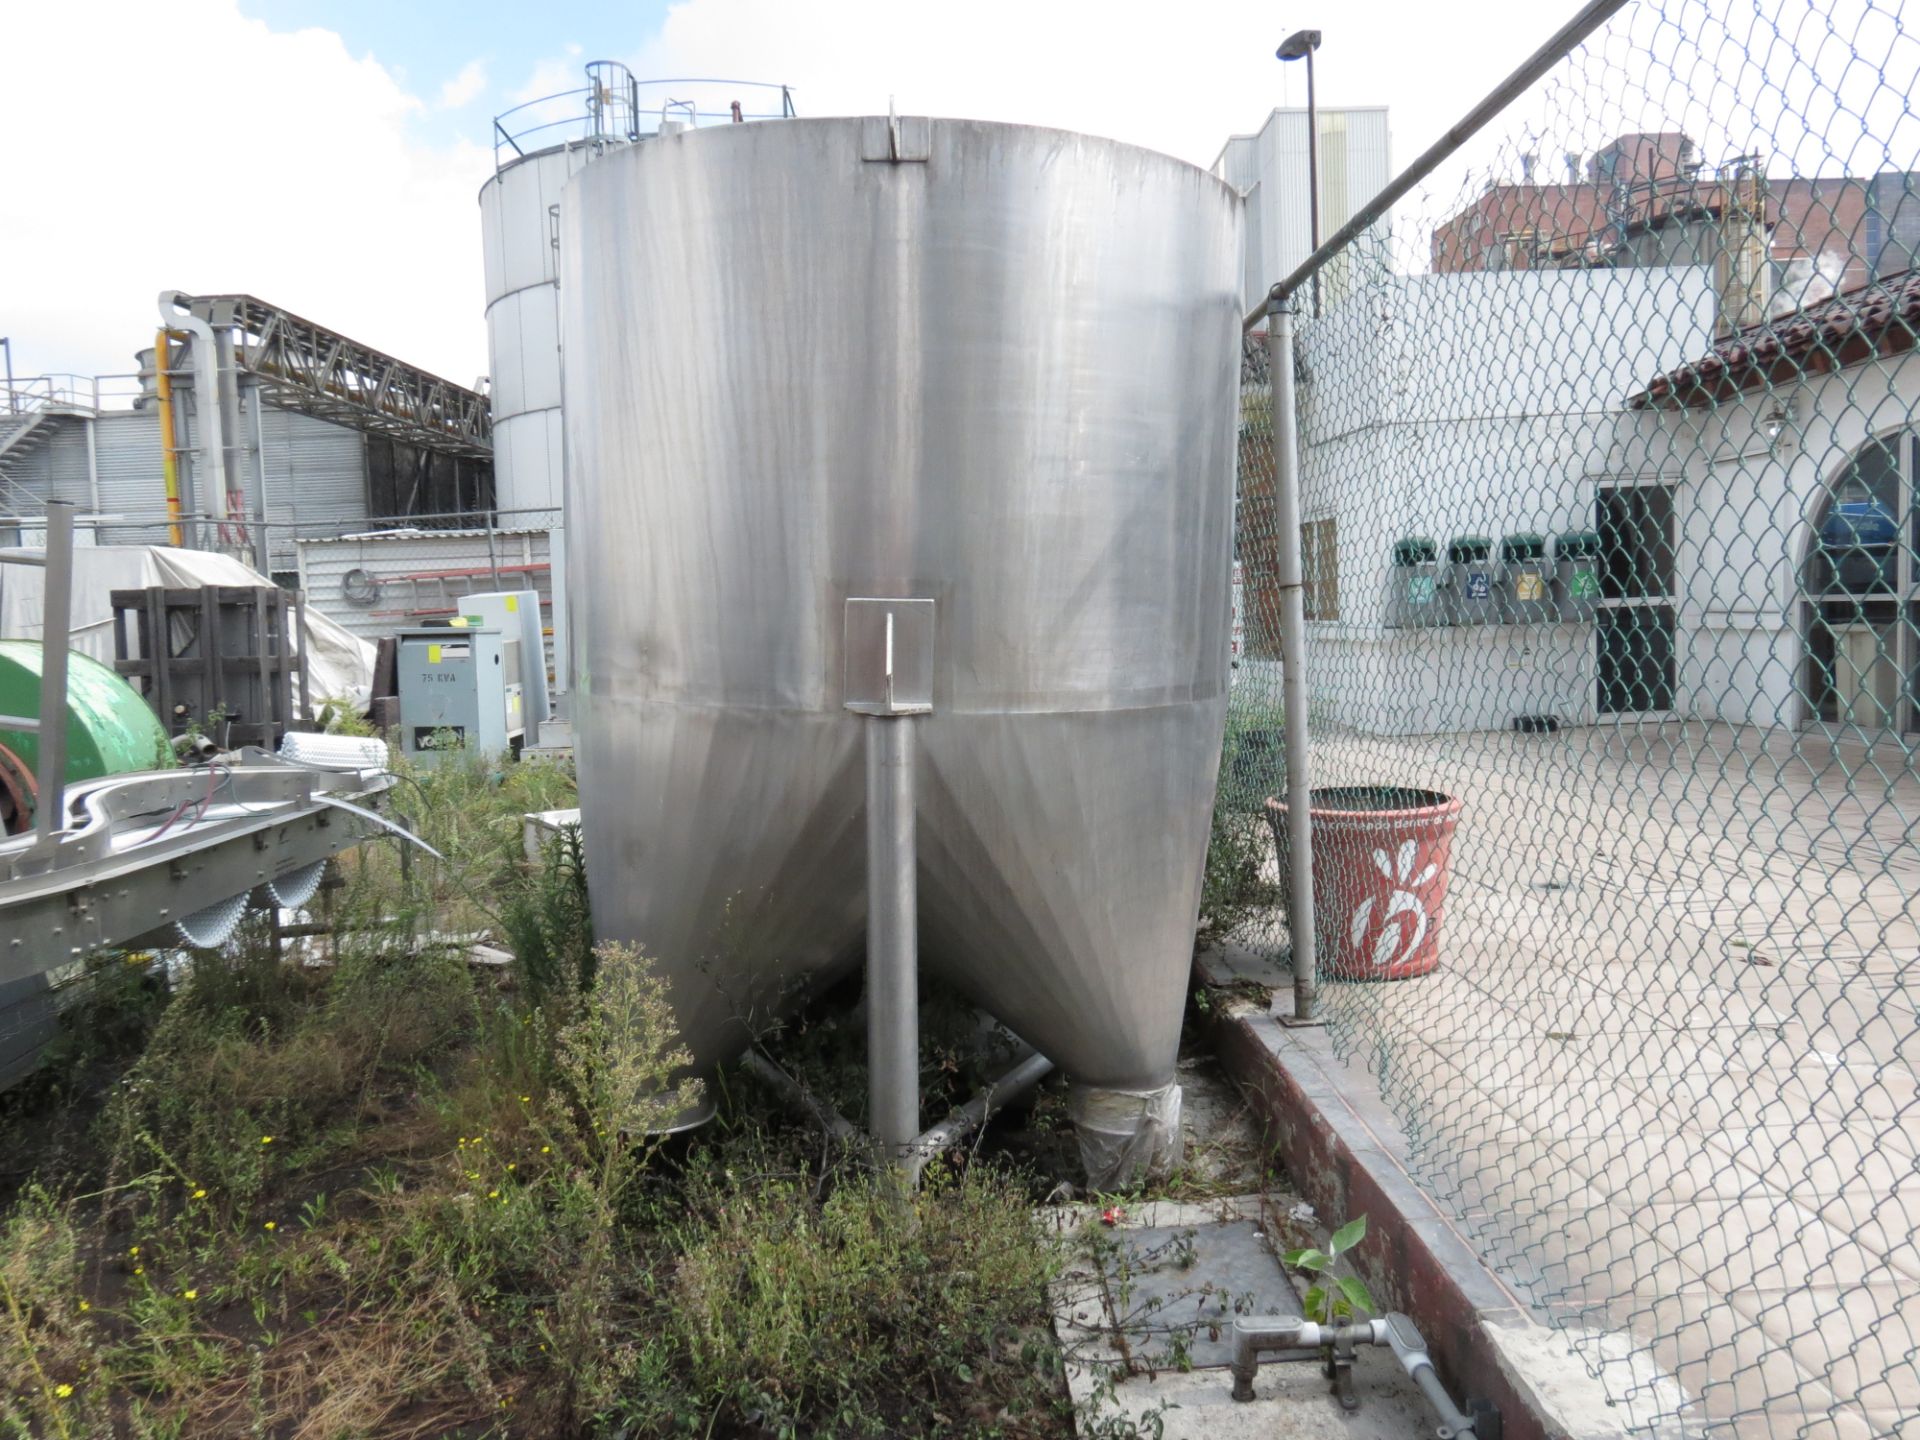 Stainless Steel Tank of 1.93 m in diameter, Includes Strong Parts conveyor belt. - Image 5 of 8